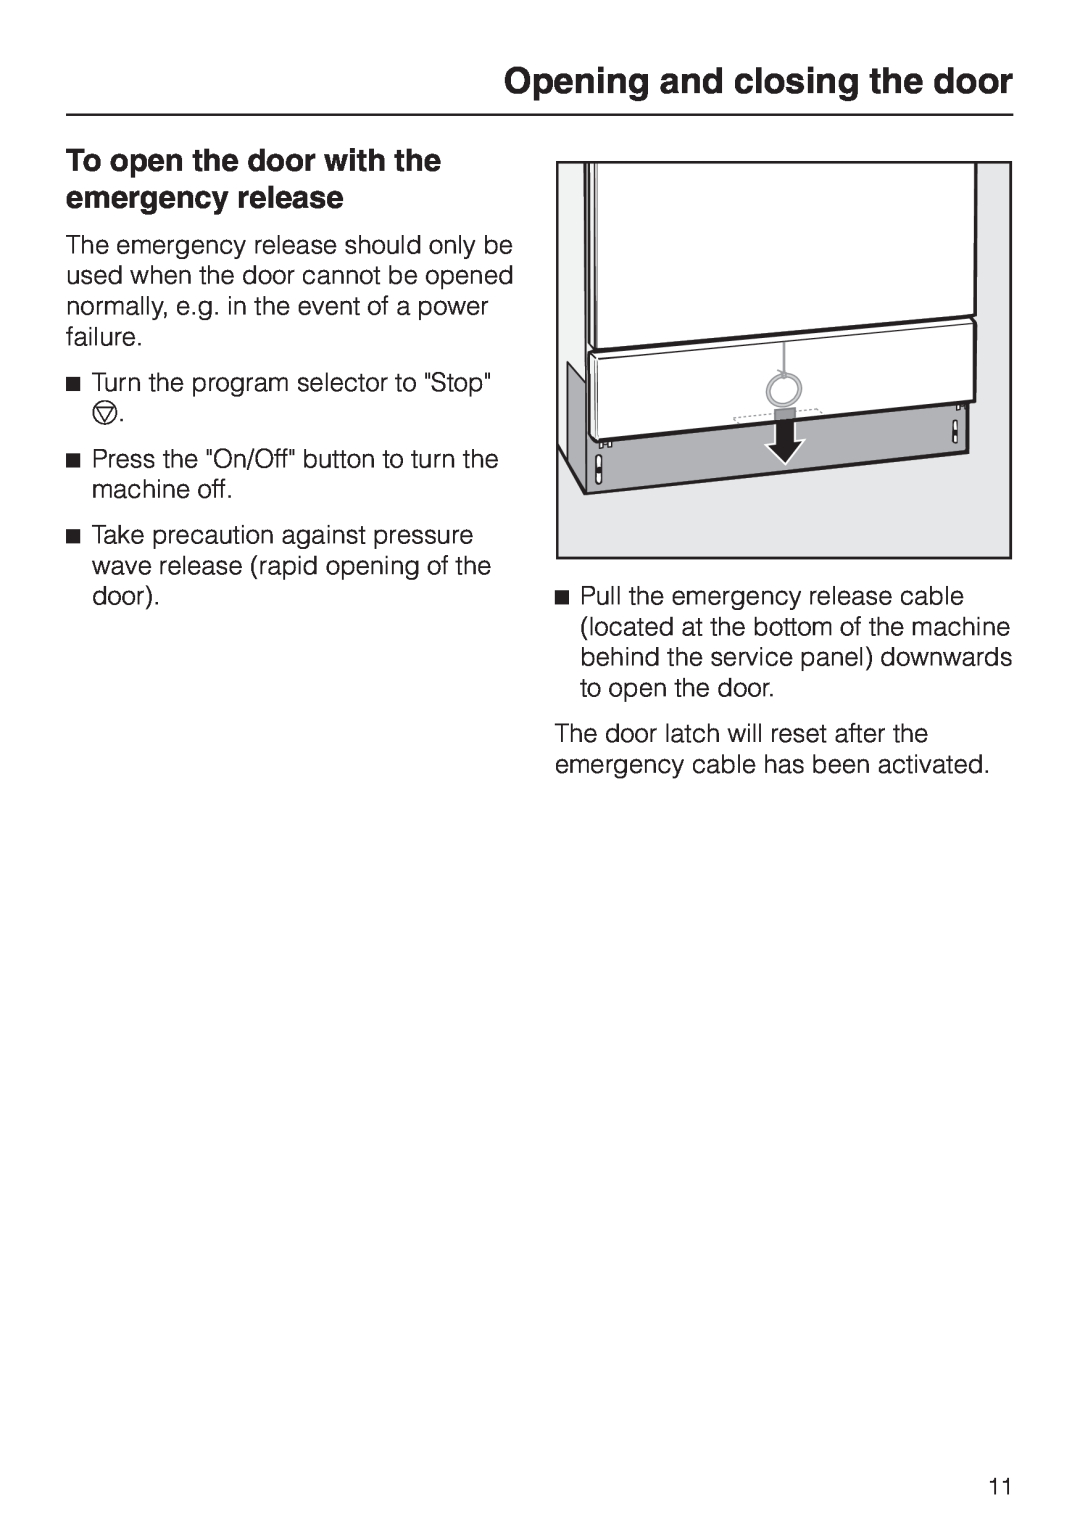 Miele G 7804 operating instructions To open the door with the emergency release, Opening and closing the door 